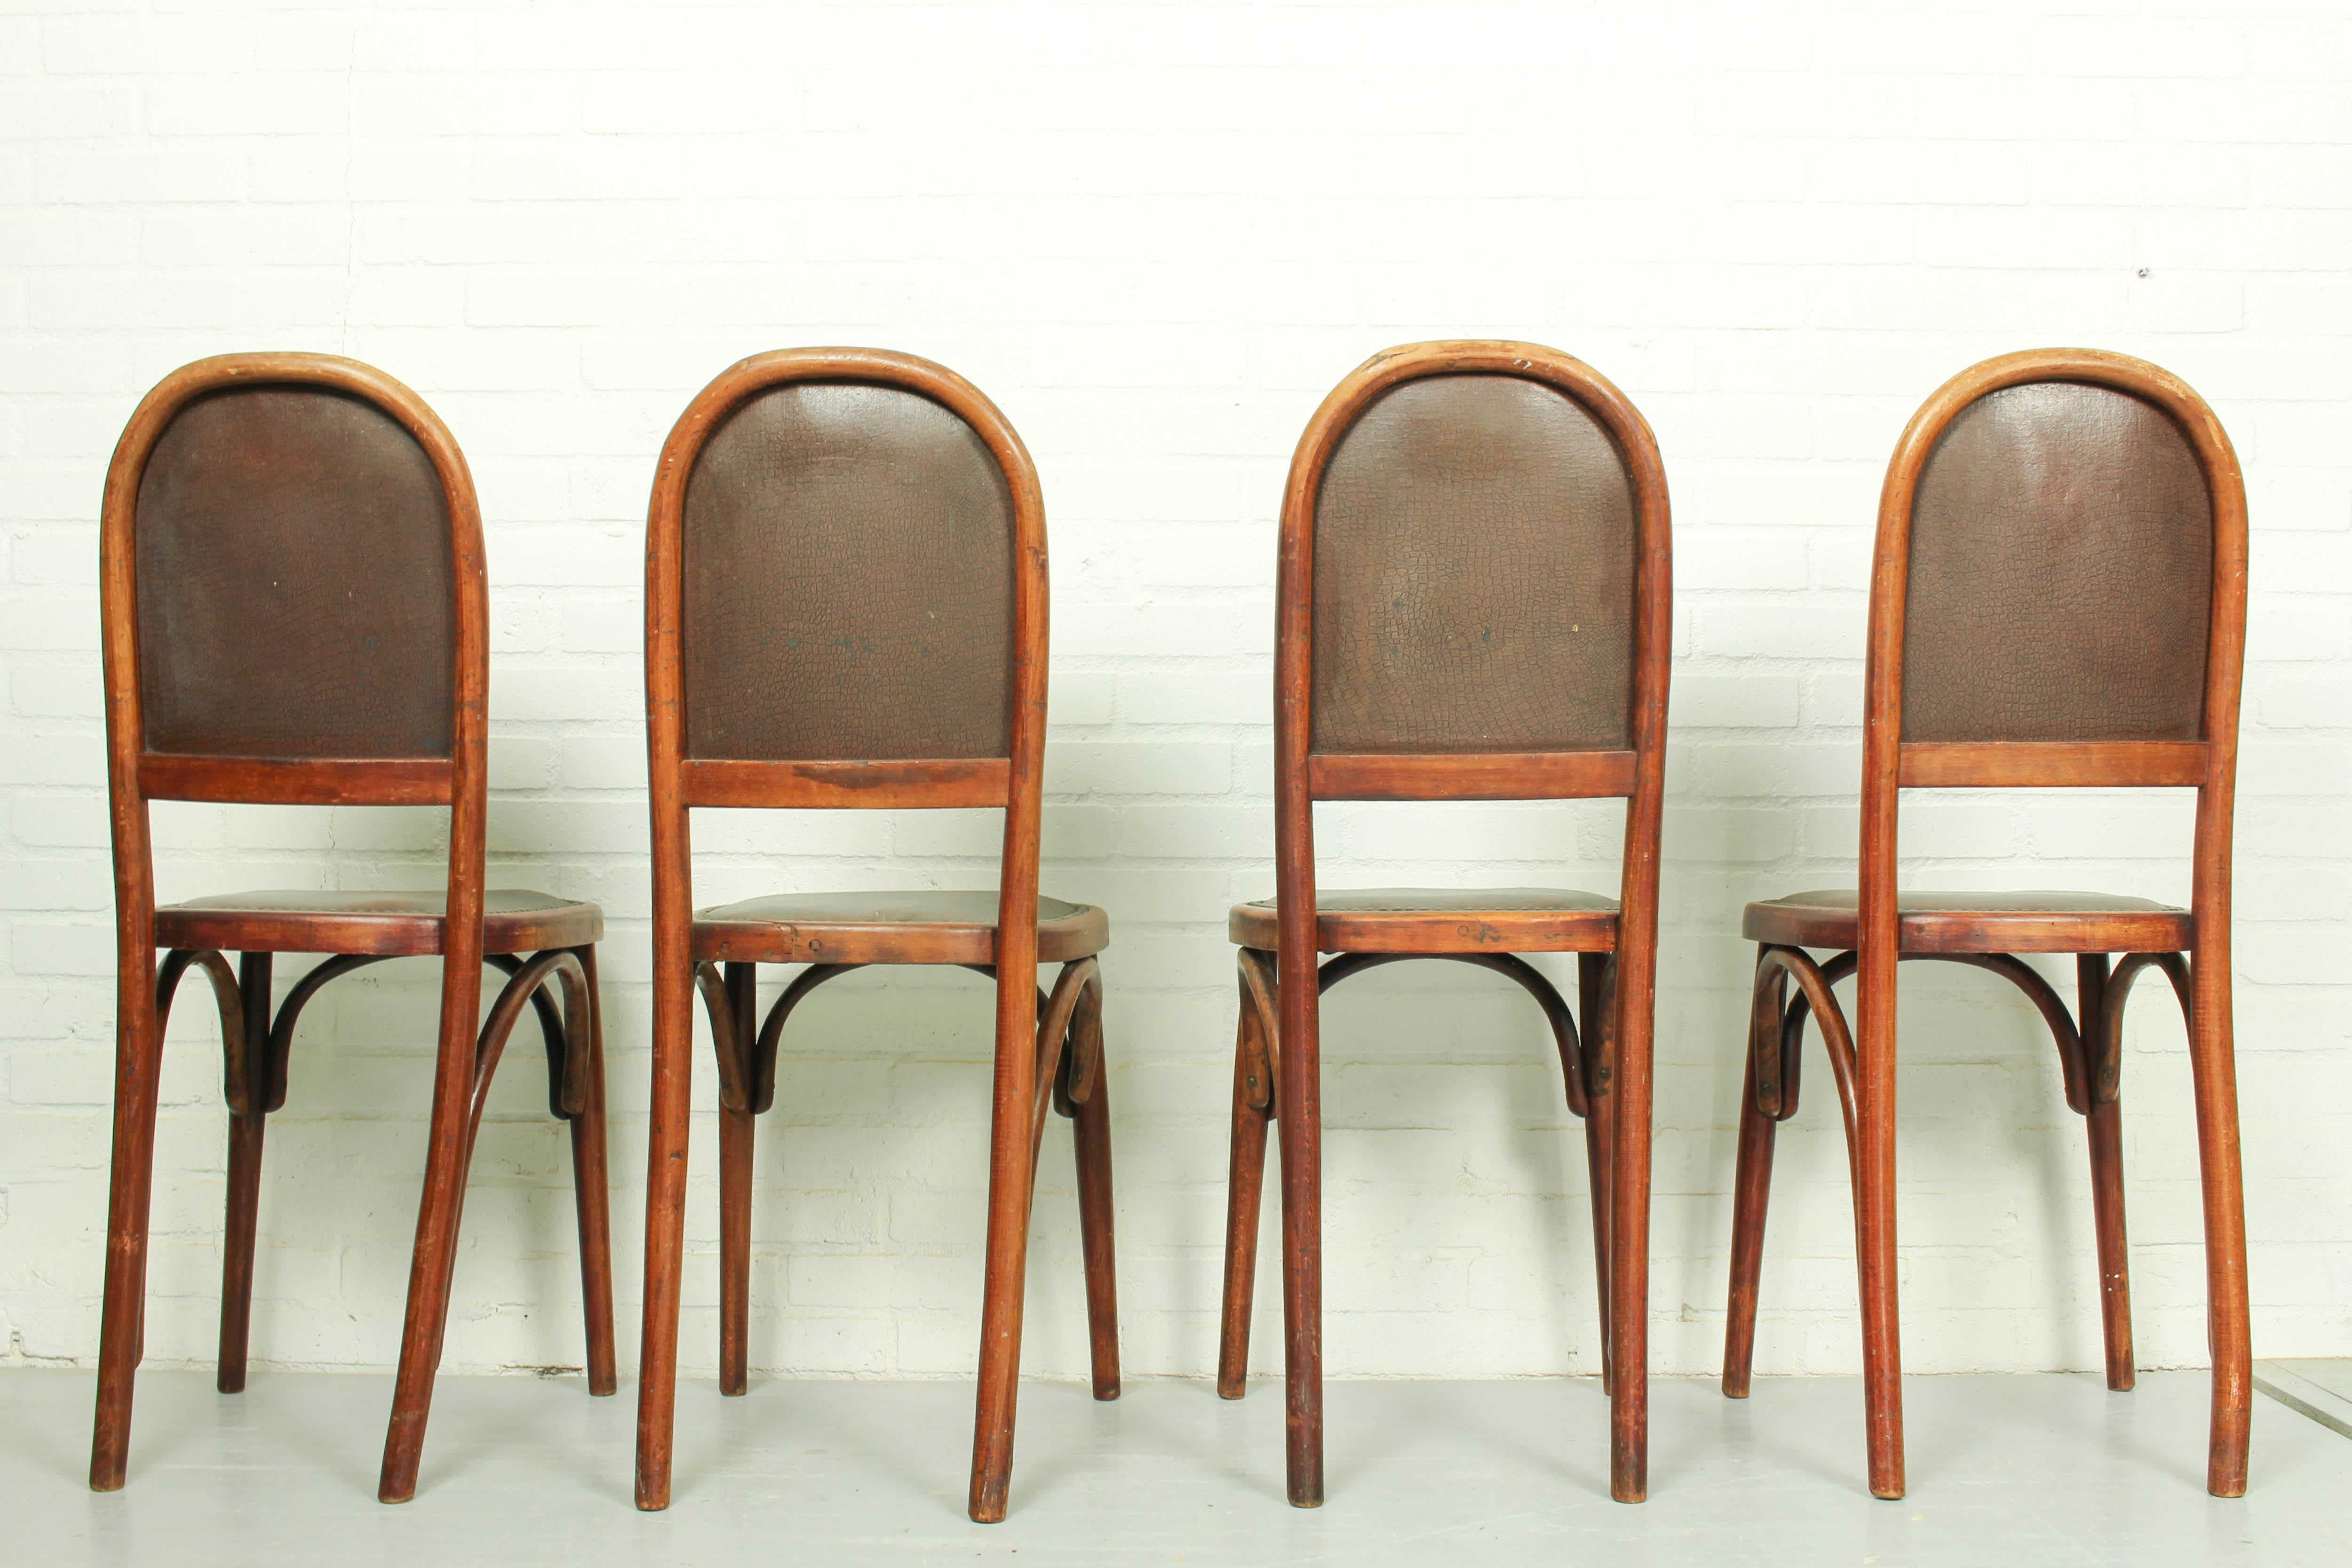  Art Nouveau Bentwood and Leather Dining Room Set from Fischel, c1910 For Sale 1